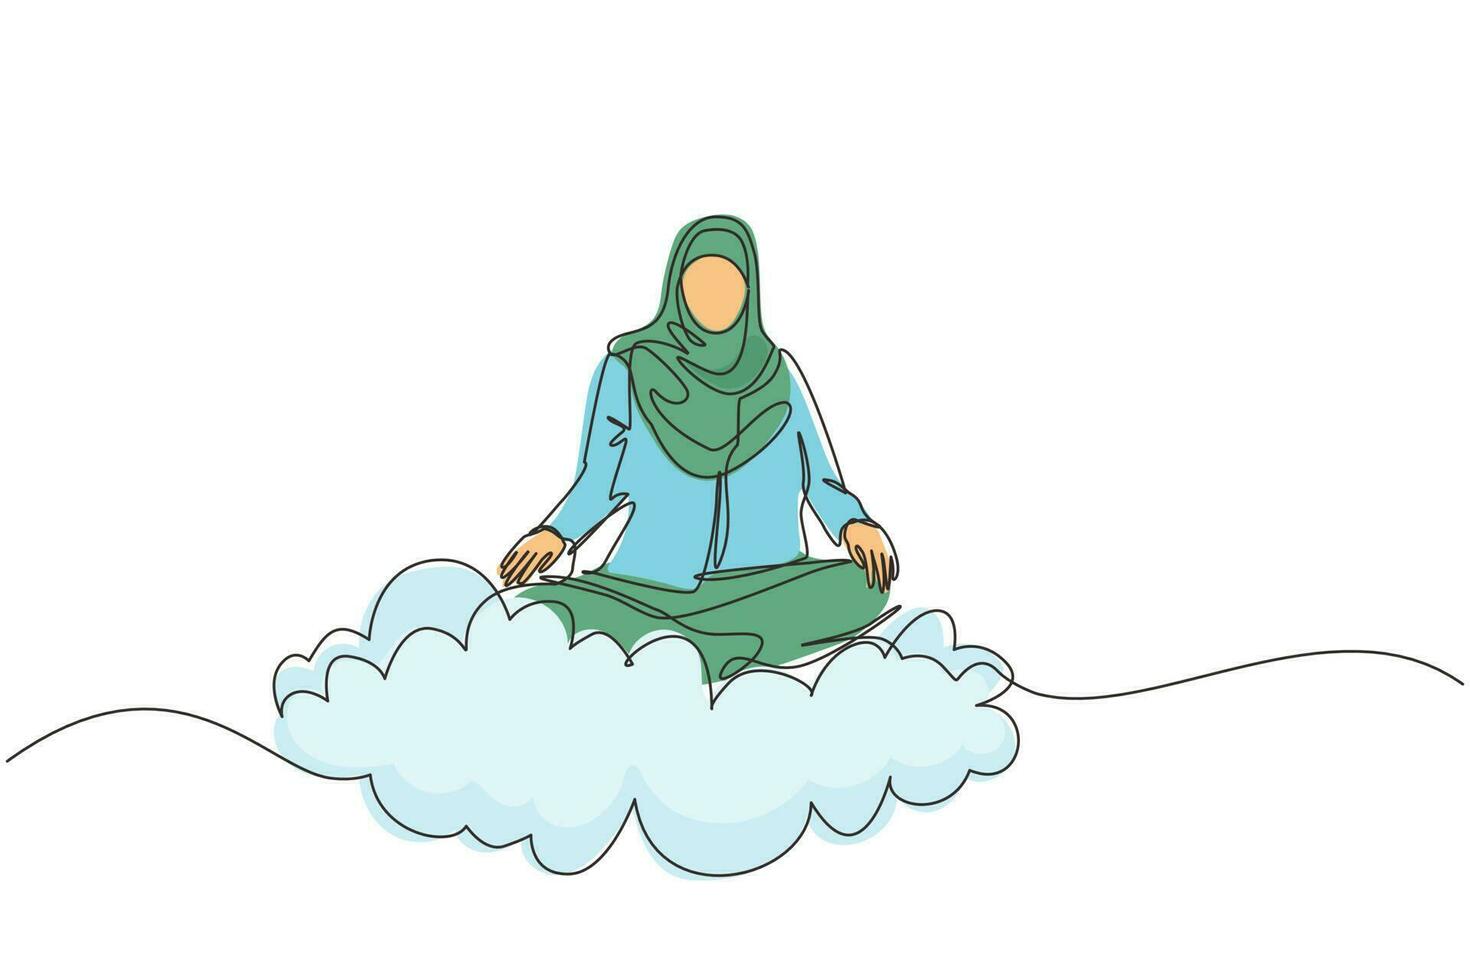 Single continuous line drawing office worker or businesswoman relaxes, meditates in lotus position on clouds. Arabian woman relaxing with yoga or meditation pose. One line draw graphic design vector